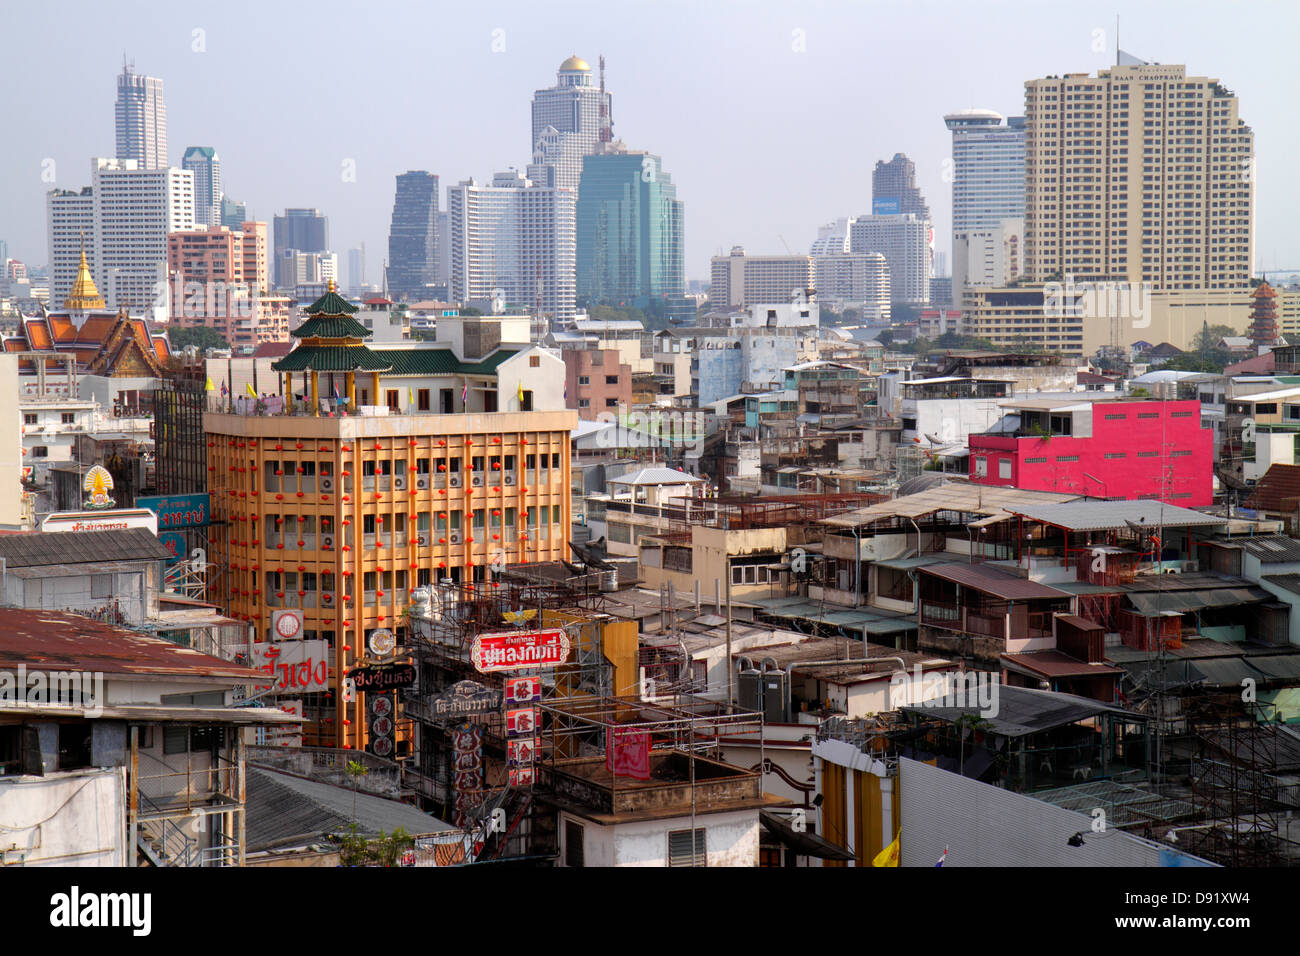 Bangkok Thailand,Thai,Samphanthawong,Chinatown,aerial overhead view from above,view,buildings,urban,city skyline,skyscrapers,Thai130209105 Stock Photo